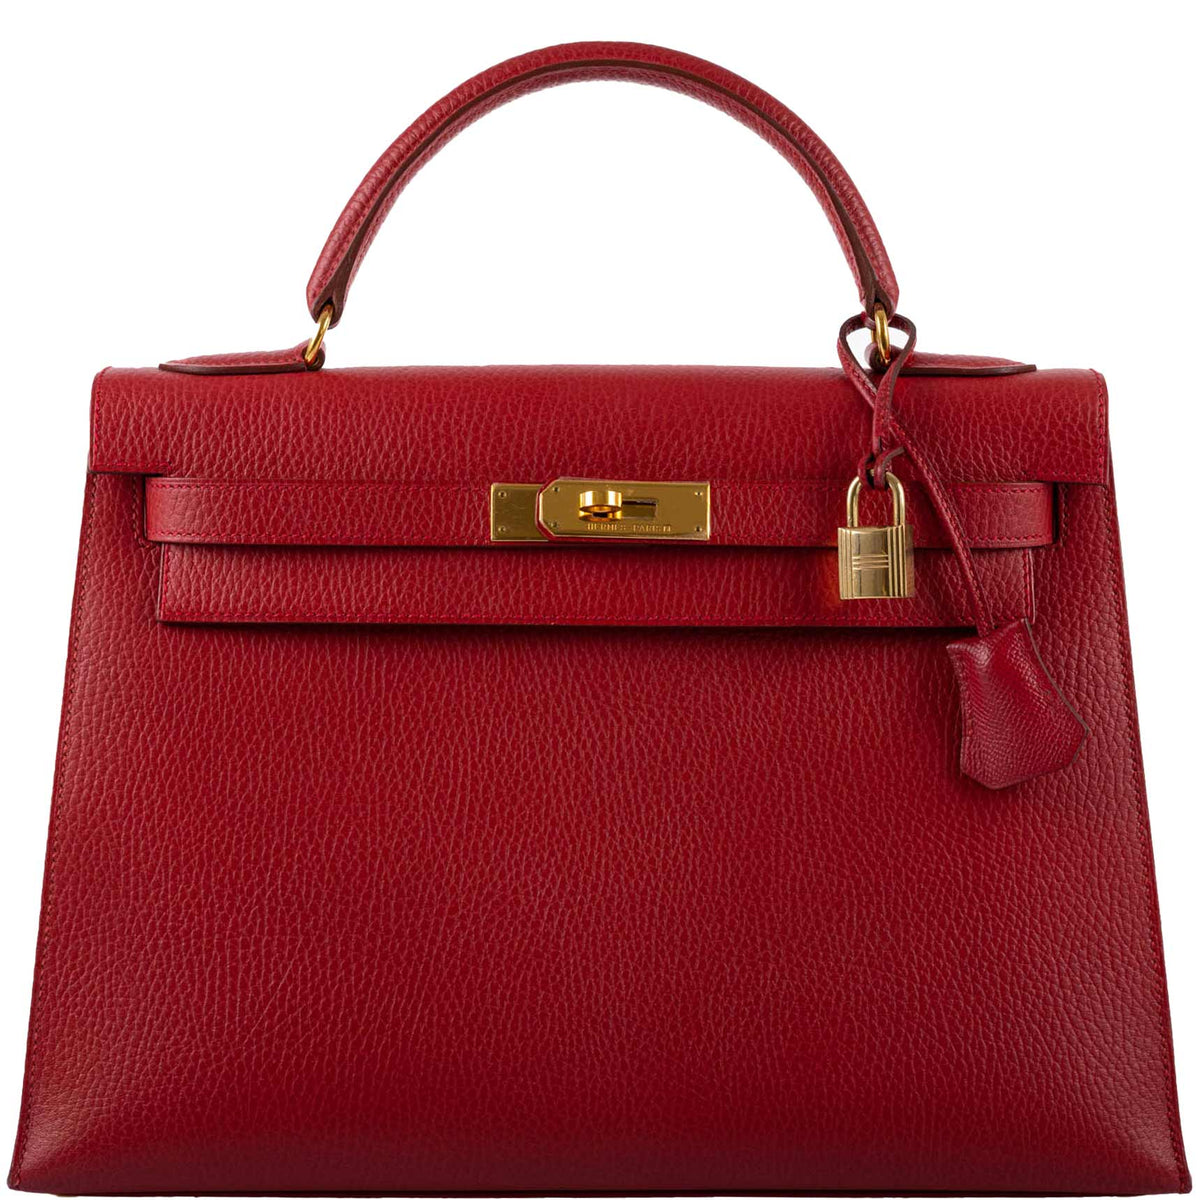 A NATUREL ARDENNES LEATHER SELLIER KELLY 32 WITH GOLD HARDWARE, HERMÈS,  2007